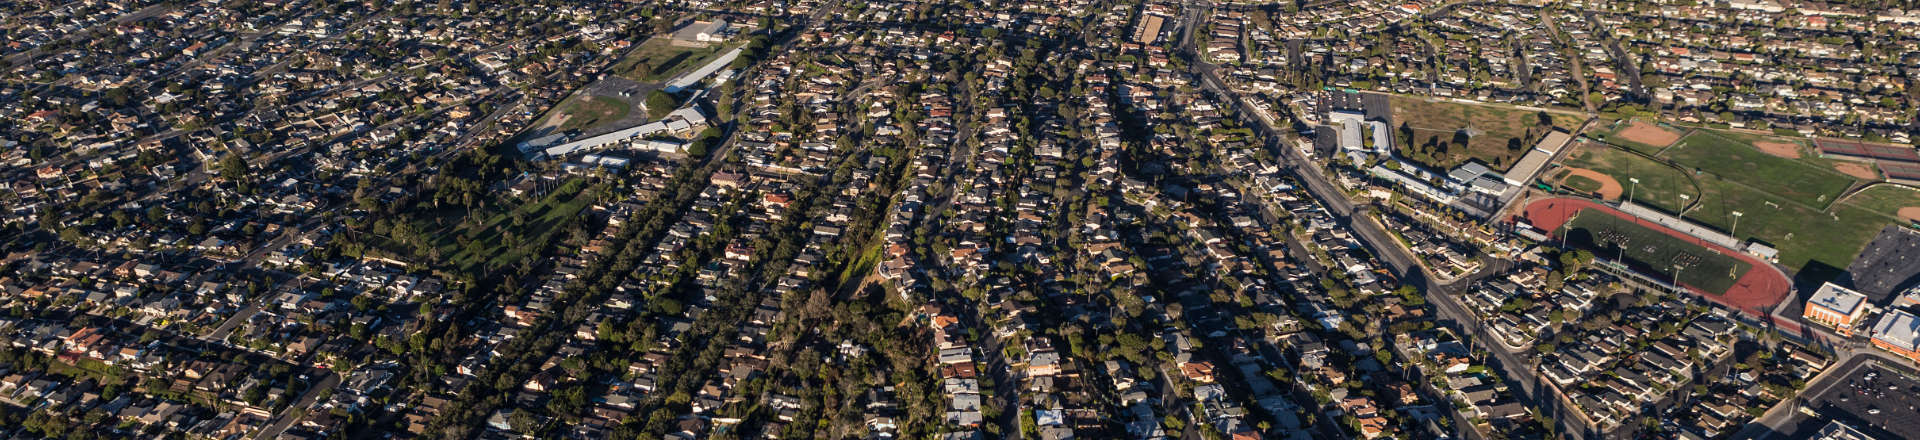 aerial view of Torrance, CA